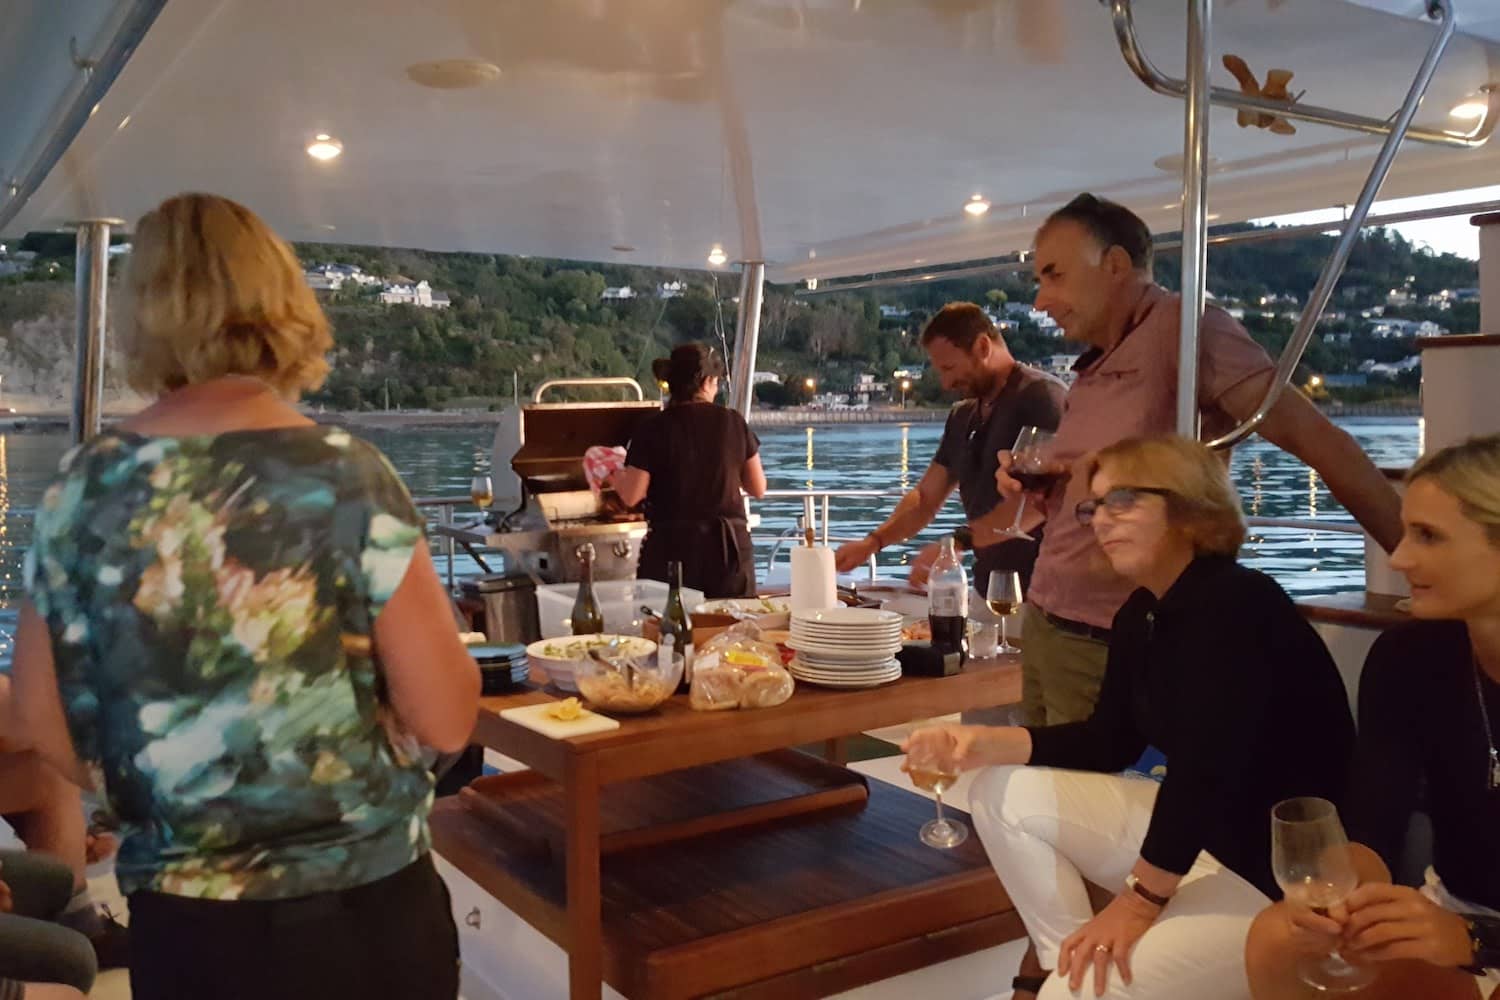 Harbour cruises are a great way to celebrate and impress your guests